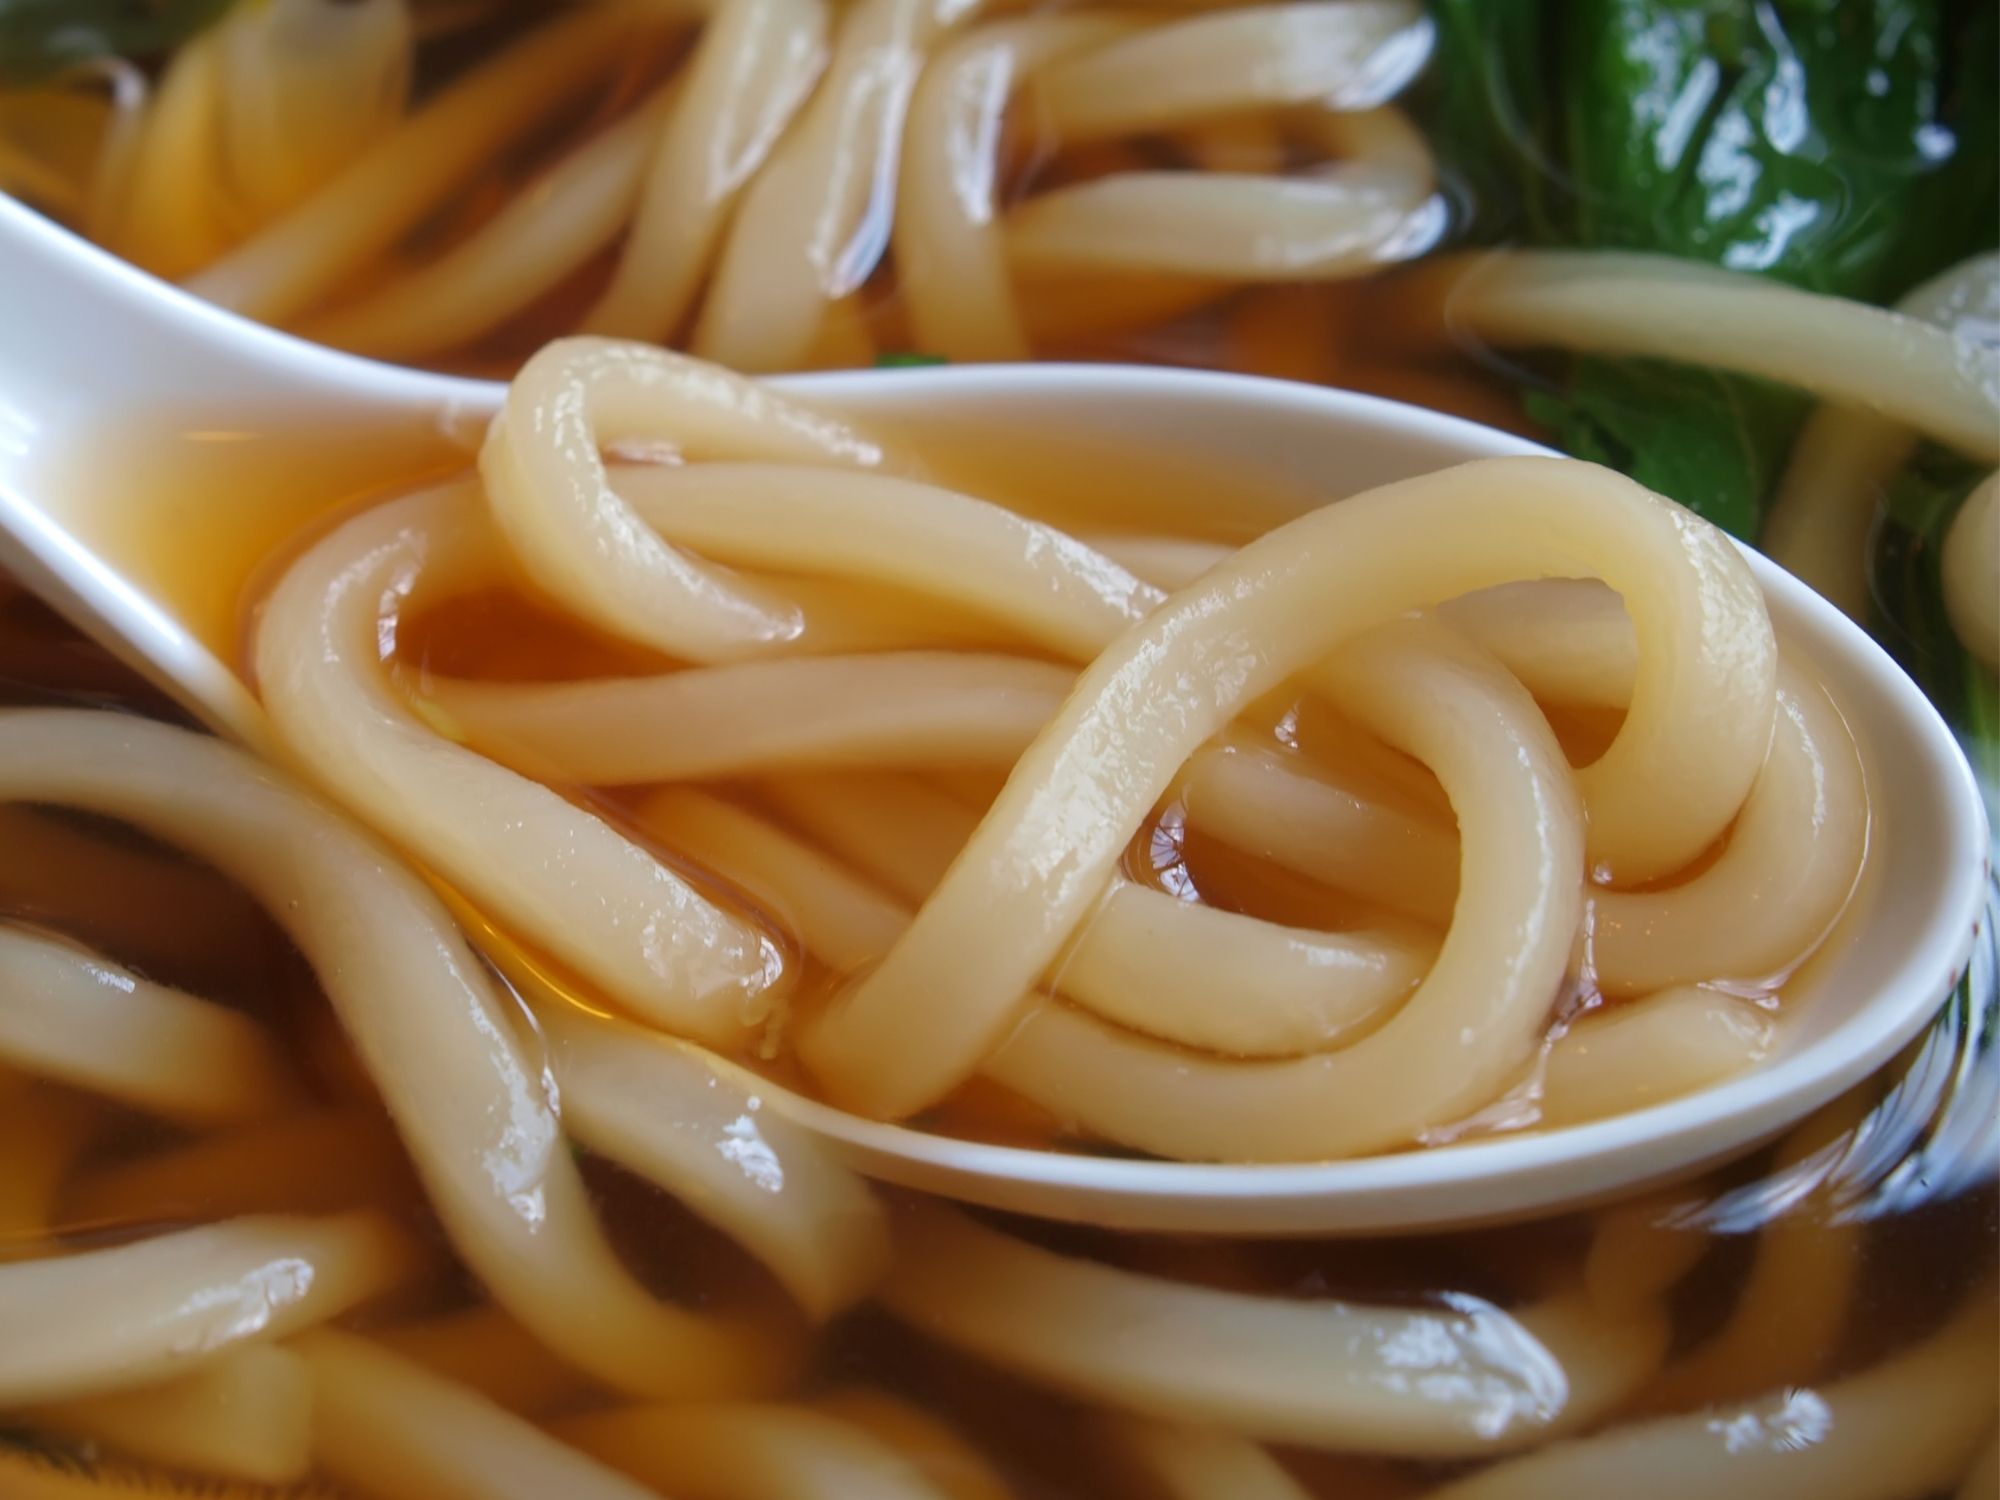 Udon Nudeln